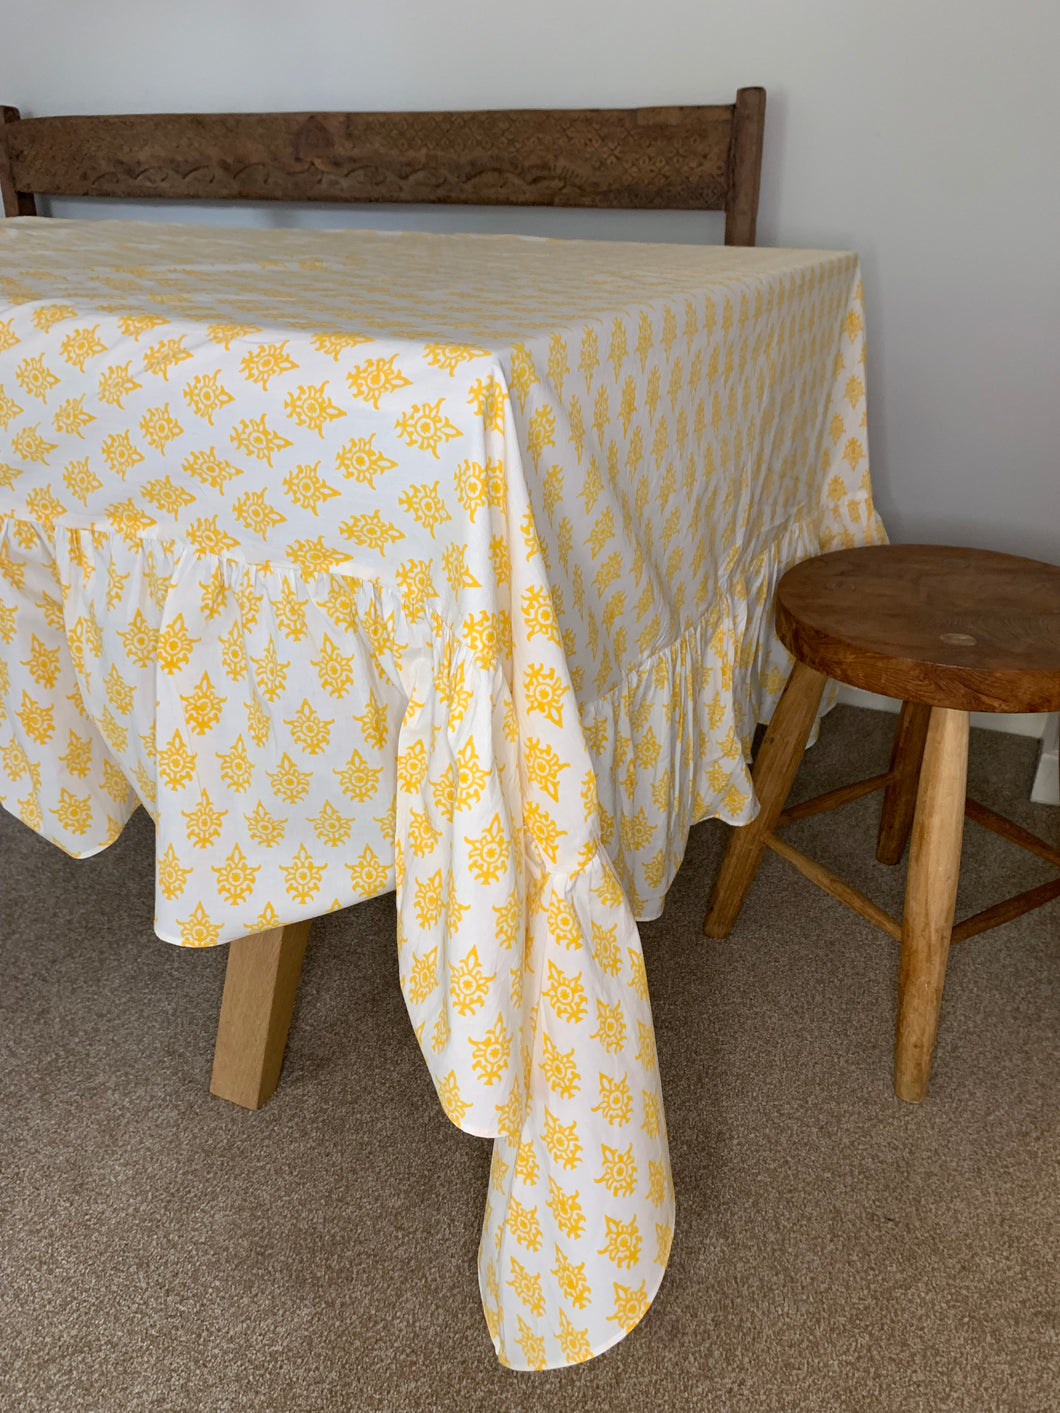 White based with yellow mini tree of life - Super Ruffle Peplum Table Cloth with drawstring Gift bag